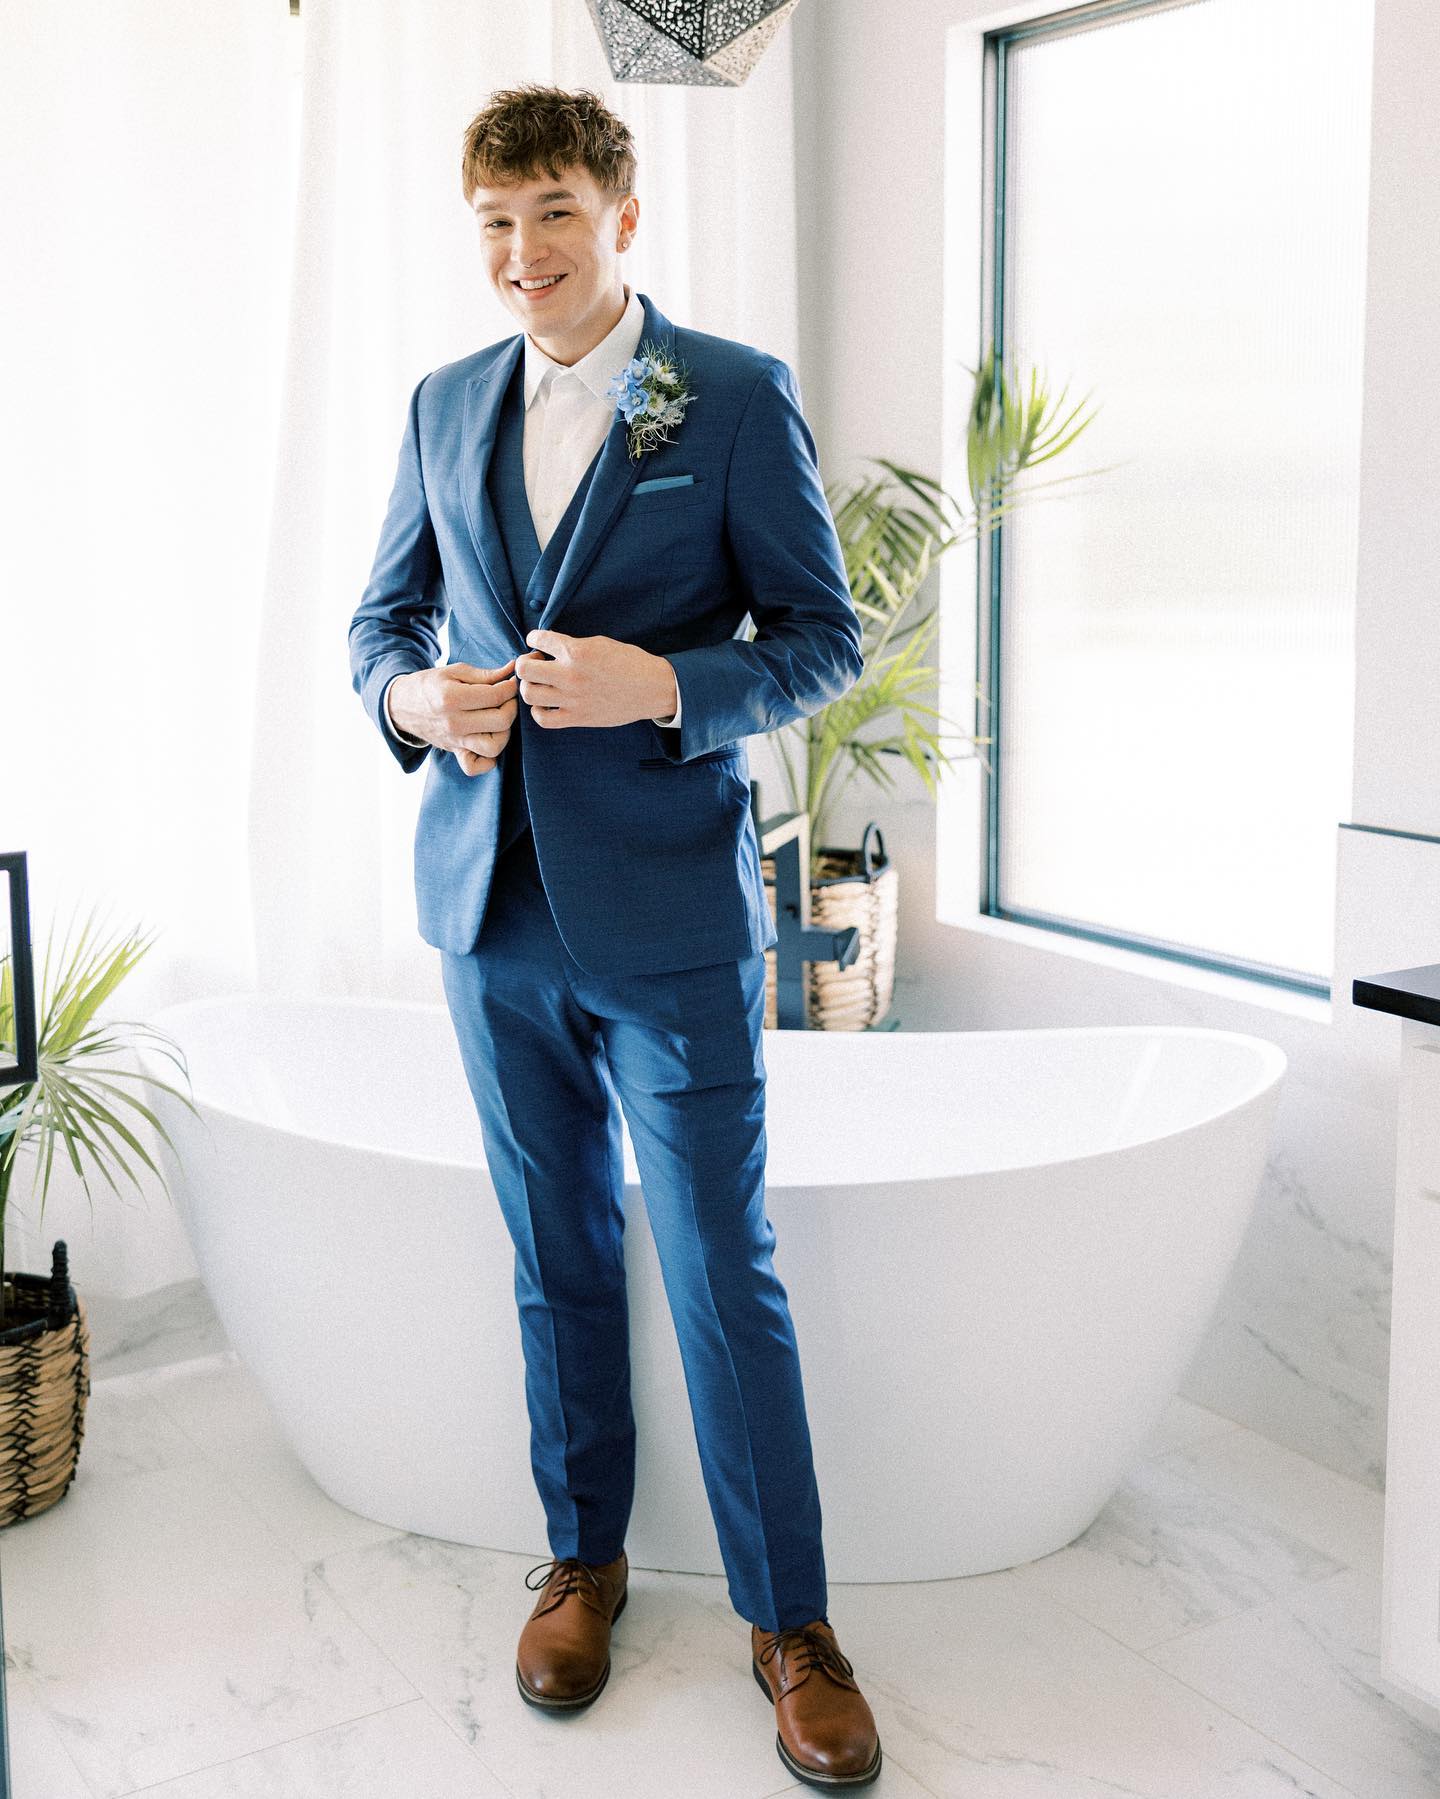 styling blue suit with brown shoes for men 9